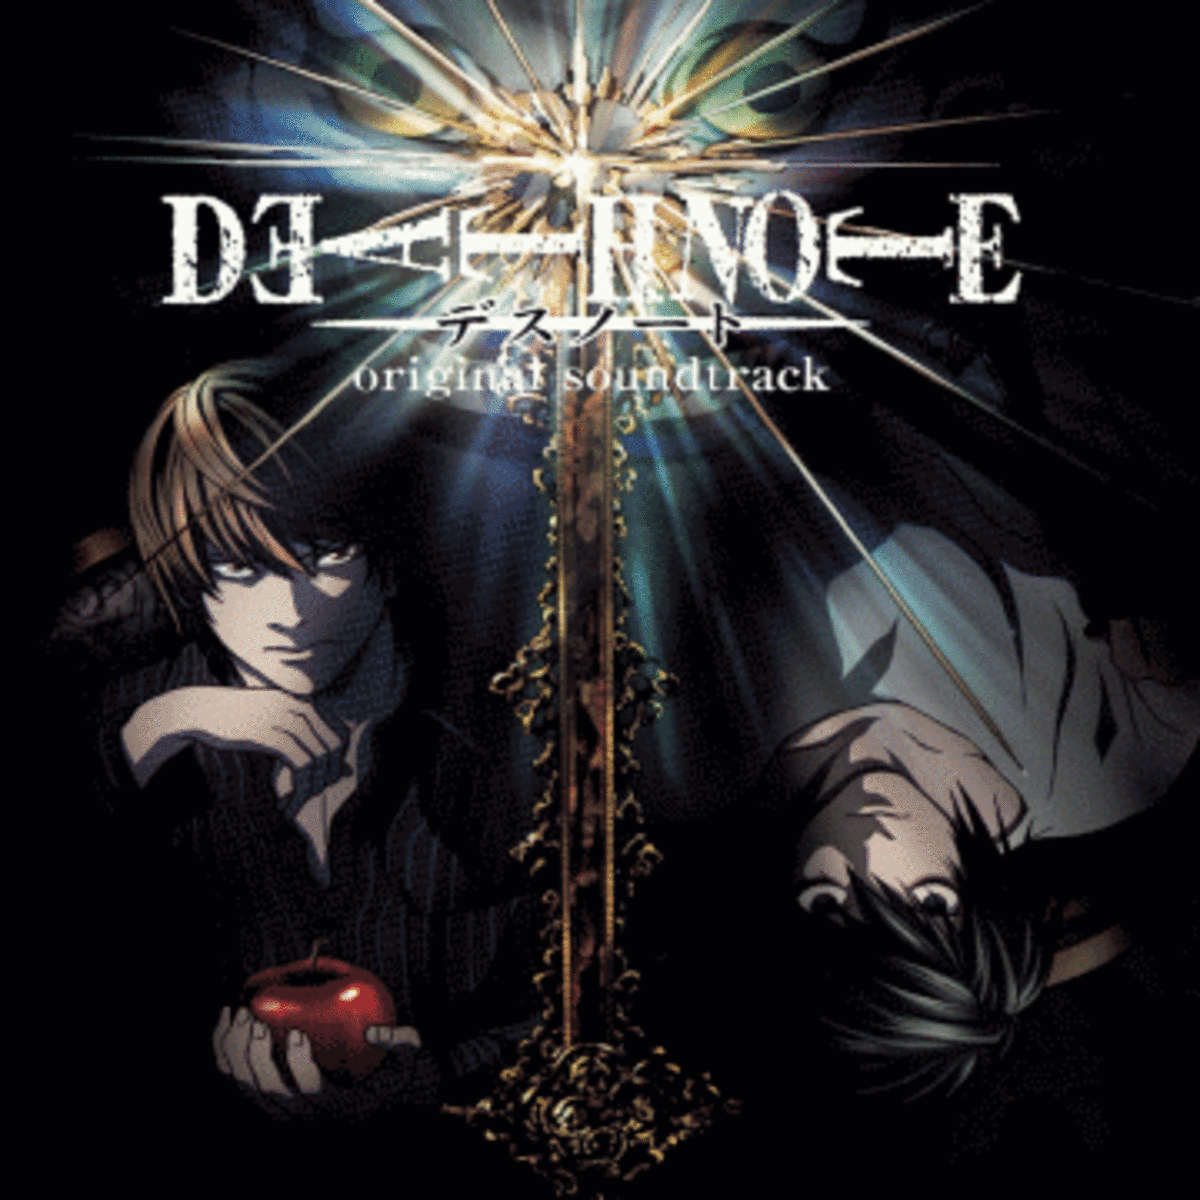 Anime Recommended - Death Note